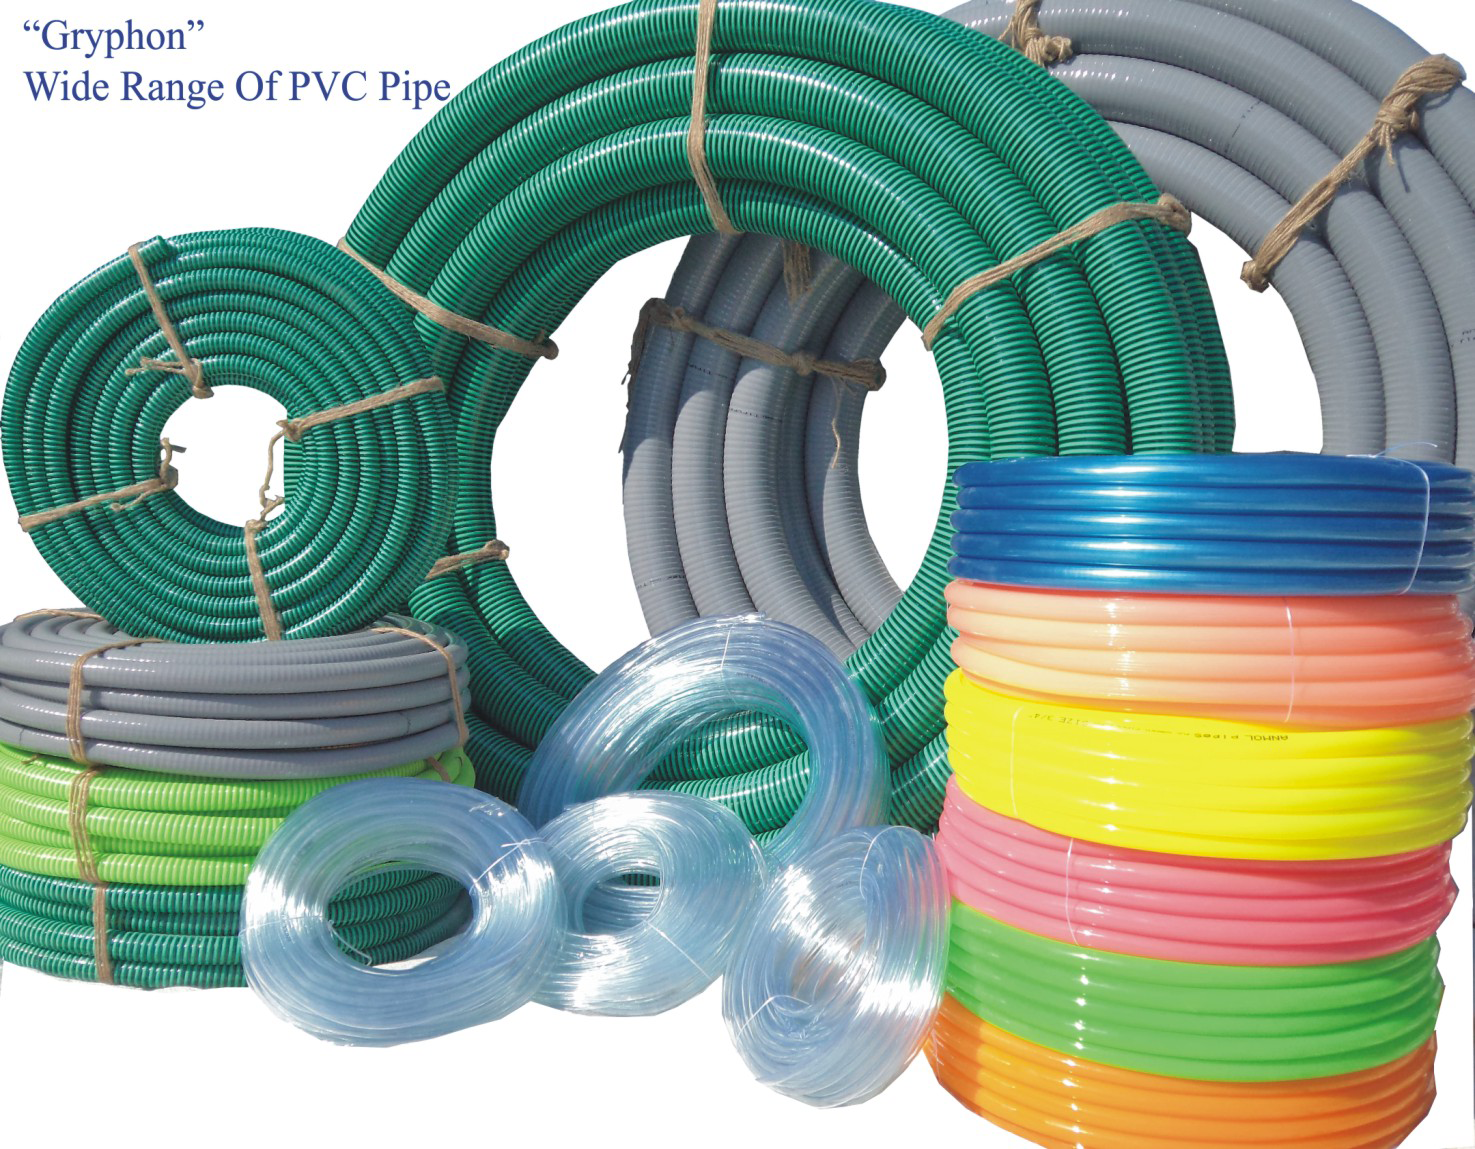 Faxible PVC Pipe Product Range.